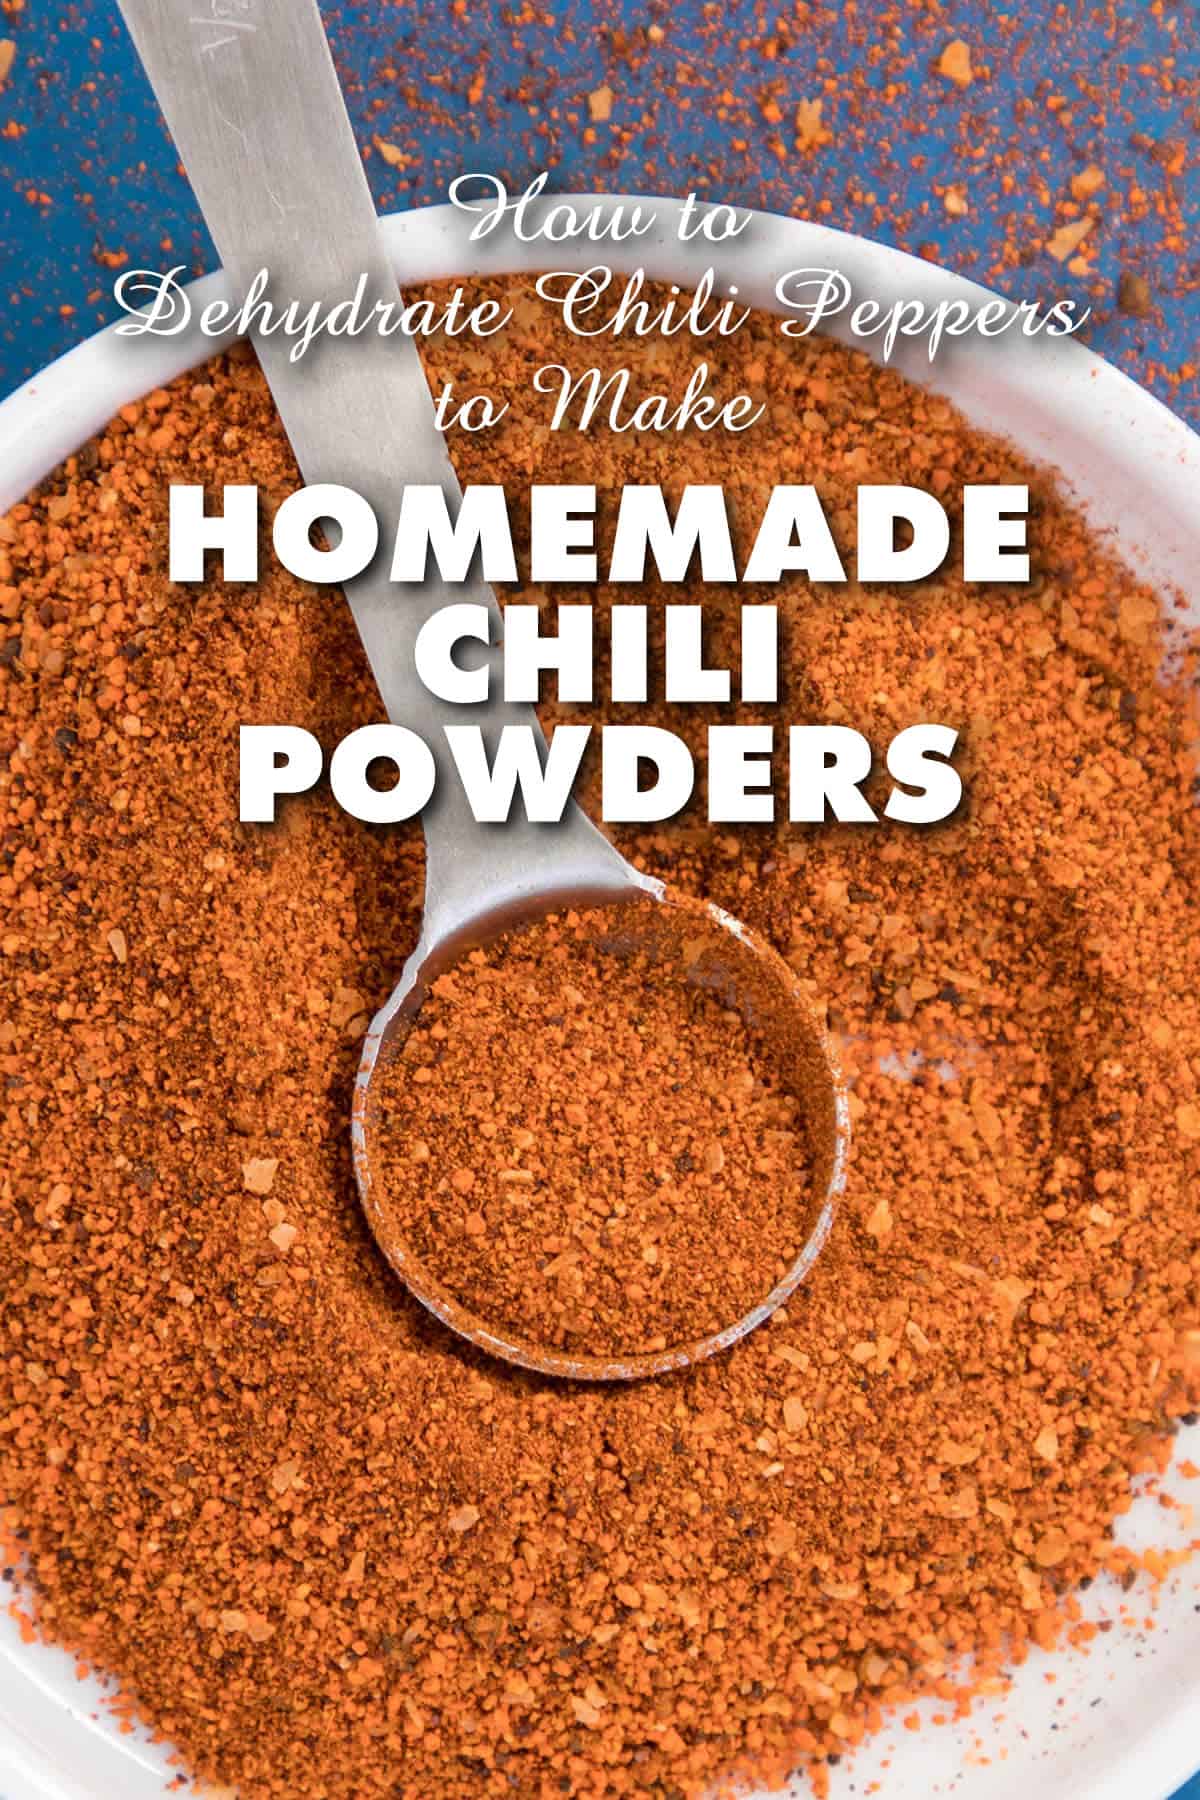 How to Dehydrate Chili Peppers and Make Chili Powders - Chili